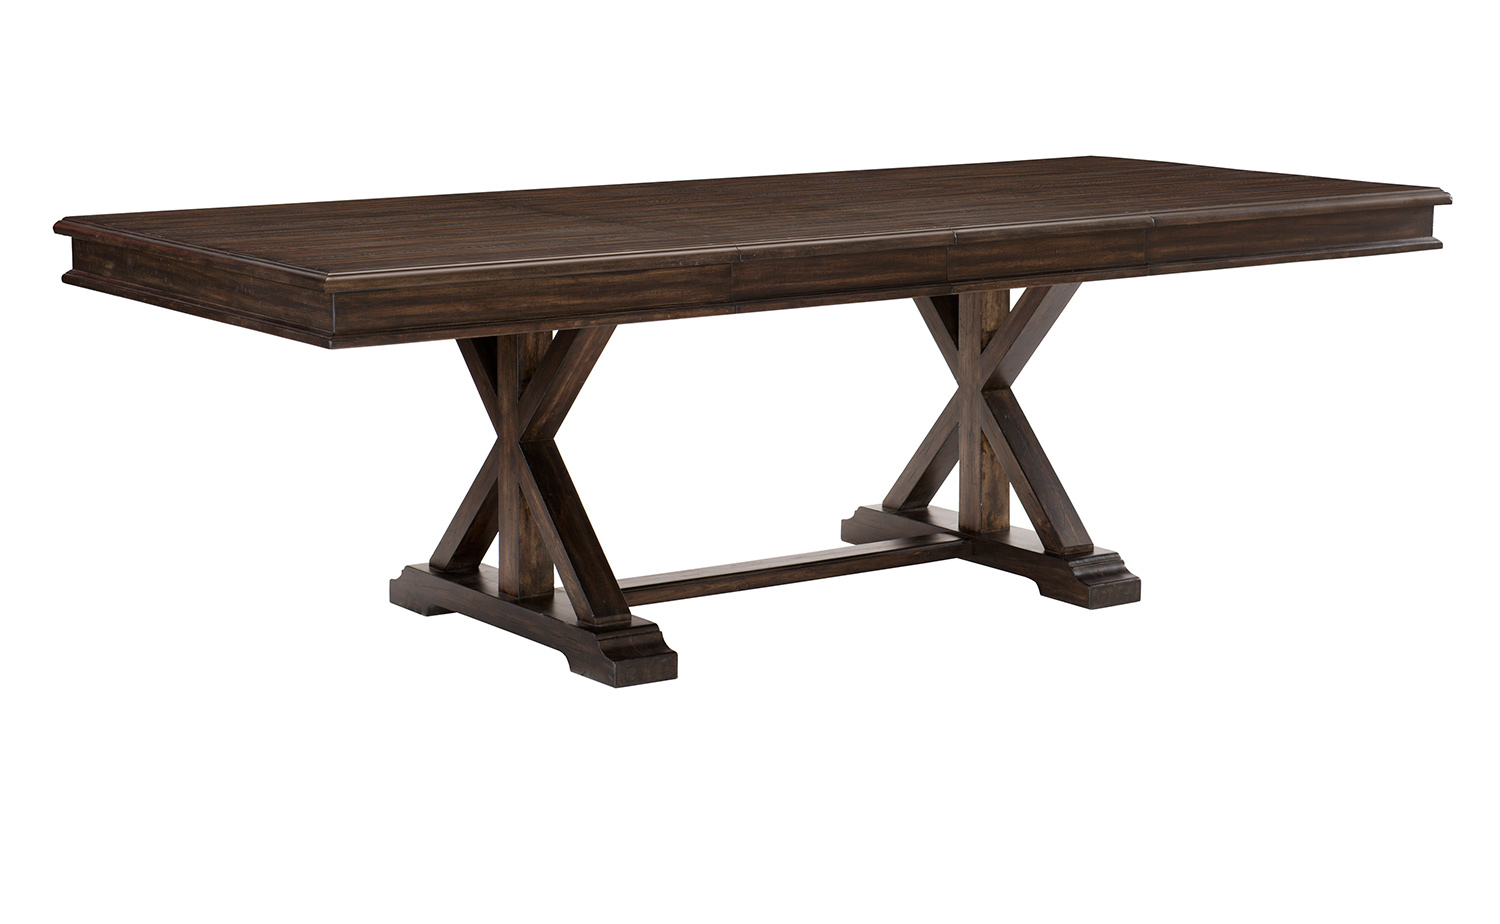 Homelegance Cardano Dining Table - Driftwood Charcoal